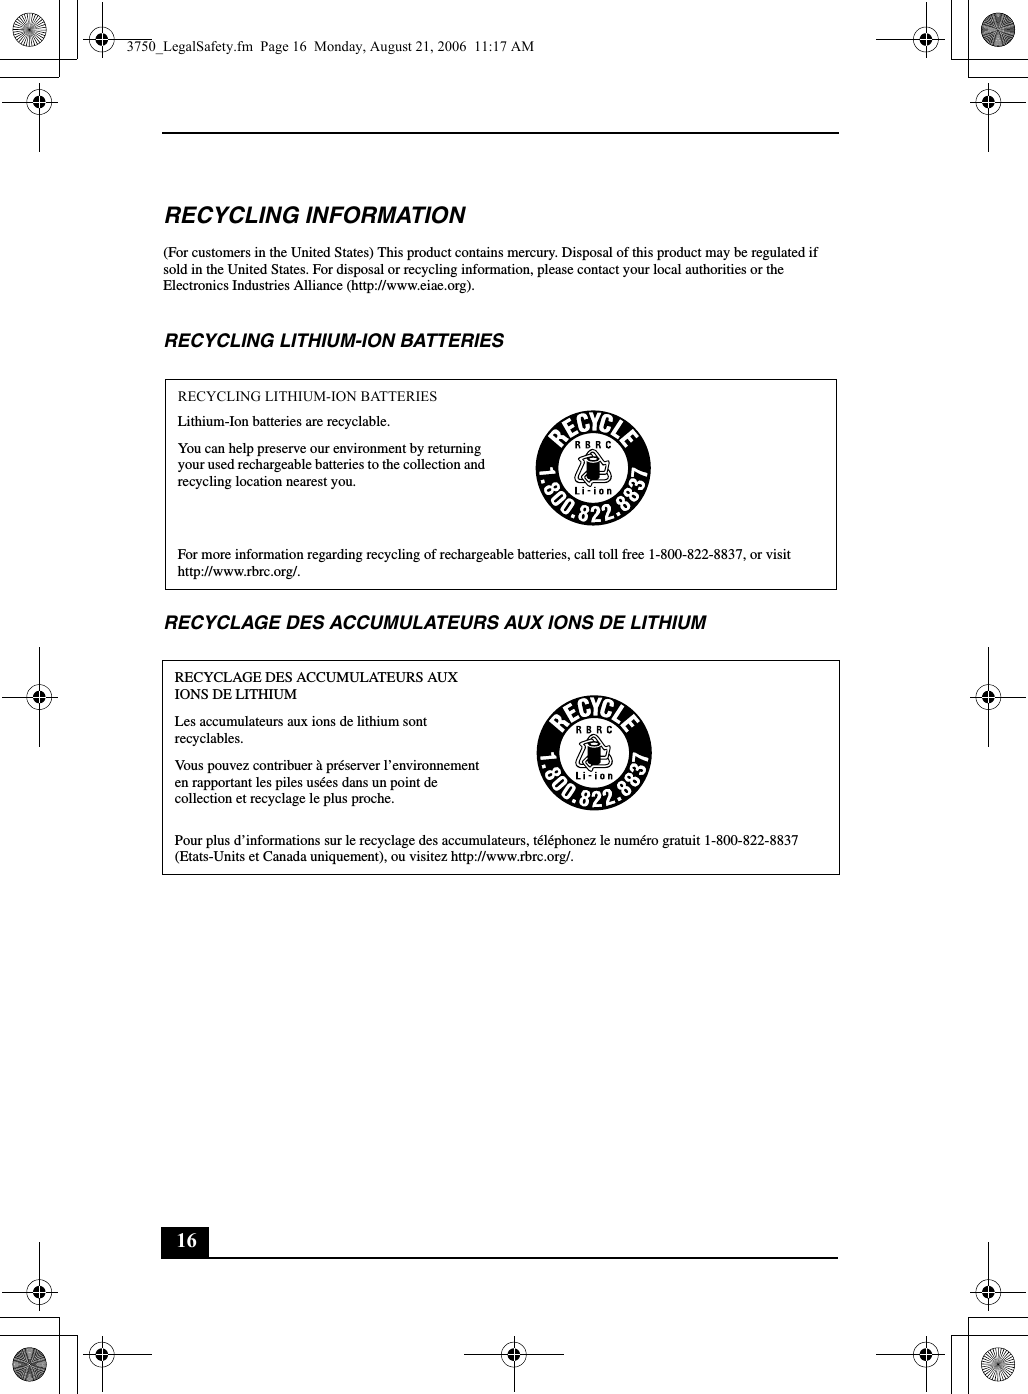 16RECYCLING INFORMATION(For customers in the United States) This product contains mercury. Disposal of this product may be regulated if sold in the United States. For disposal or recycling information, please contact your local authorities or the Electronics Industries Alliance (http://www.eiae.org).RECYCLING LITHIUM-ION BATTERIESRECYCLAGE DES ACCUMULATEURS AUX IONS DE LITHIUMRECYCLING LITHIUM-ION BATTERIESLithium-Ion batteries are recyclable.You can help preserve our environment by returning your used rechargeable batteries to the collection and recycling location nearest you.For more information regarding recycling of rechargeable batteries, call toll free 1-800-822-8837, or visit http://www.rbrc.org/.RECYCLAGE DES ACCUMULATEURS AUX IONS DE LITHIUMLes accumulateurs aux ions de lithium sont recyclables.Vous pouvez contribuer à préserver l’environnement en rapportant les piles usées dans un point de collection et recyclage le plus proche.Pour plus d’informations sur le recyclage des accumulateurs, téléphonez le numéro gratuit 1-800-822-8837 (Etats-Units et Canada uniquement), ou visitez http://www.rbrc.org/.3750_LegalSafety.fm  Page 16  Monday, August 21, 2006  11:17 AM